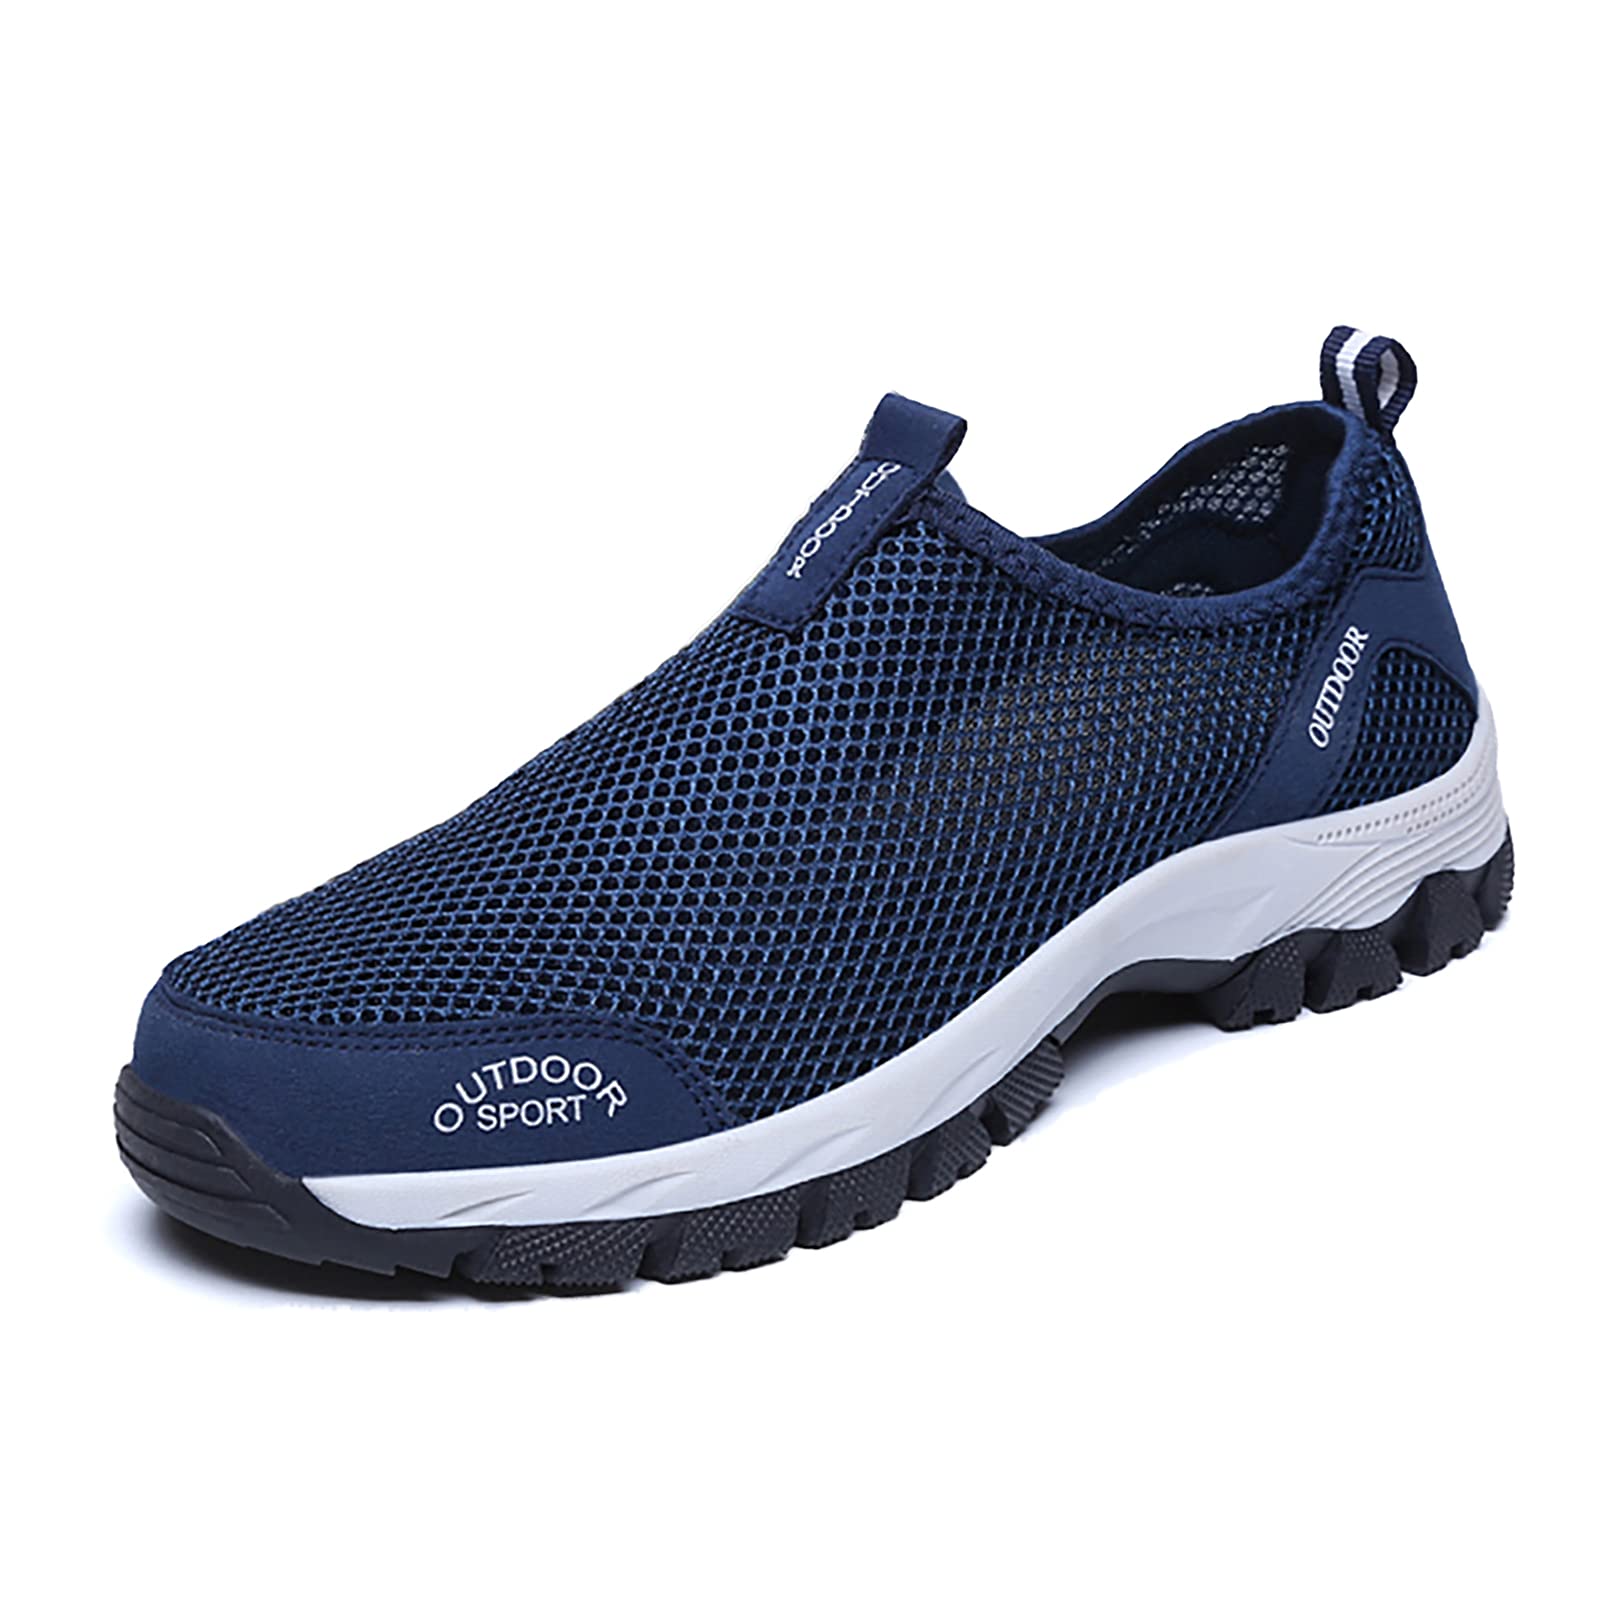 Men's Comfy Summer Hollow Out Breathable Mesh Casual Walking Shoes